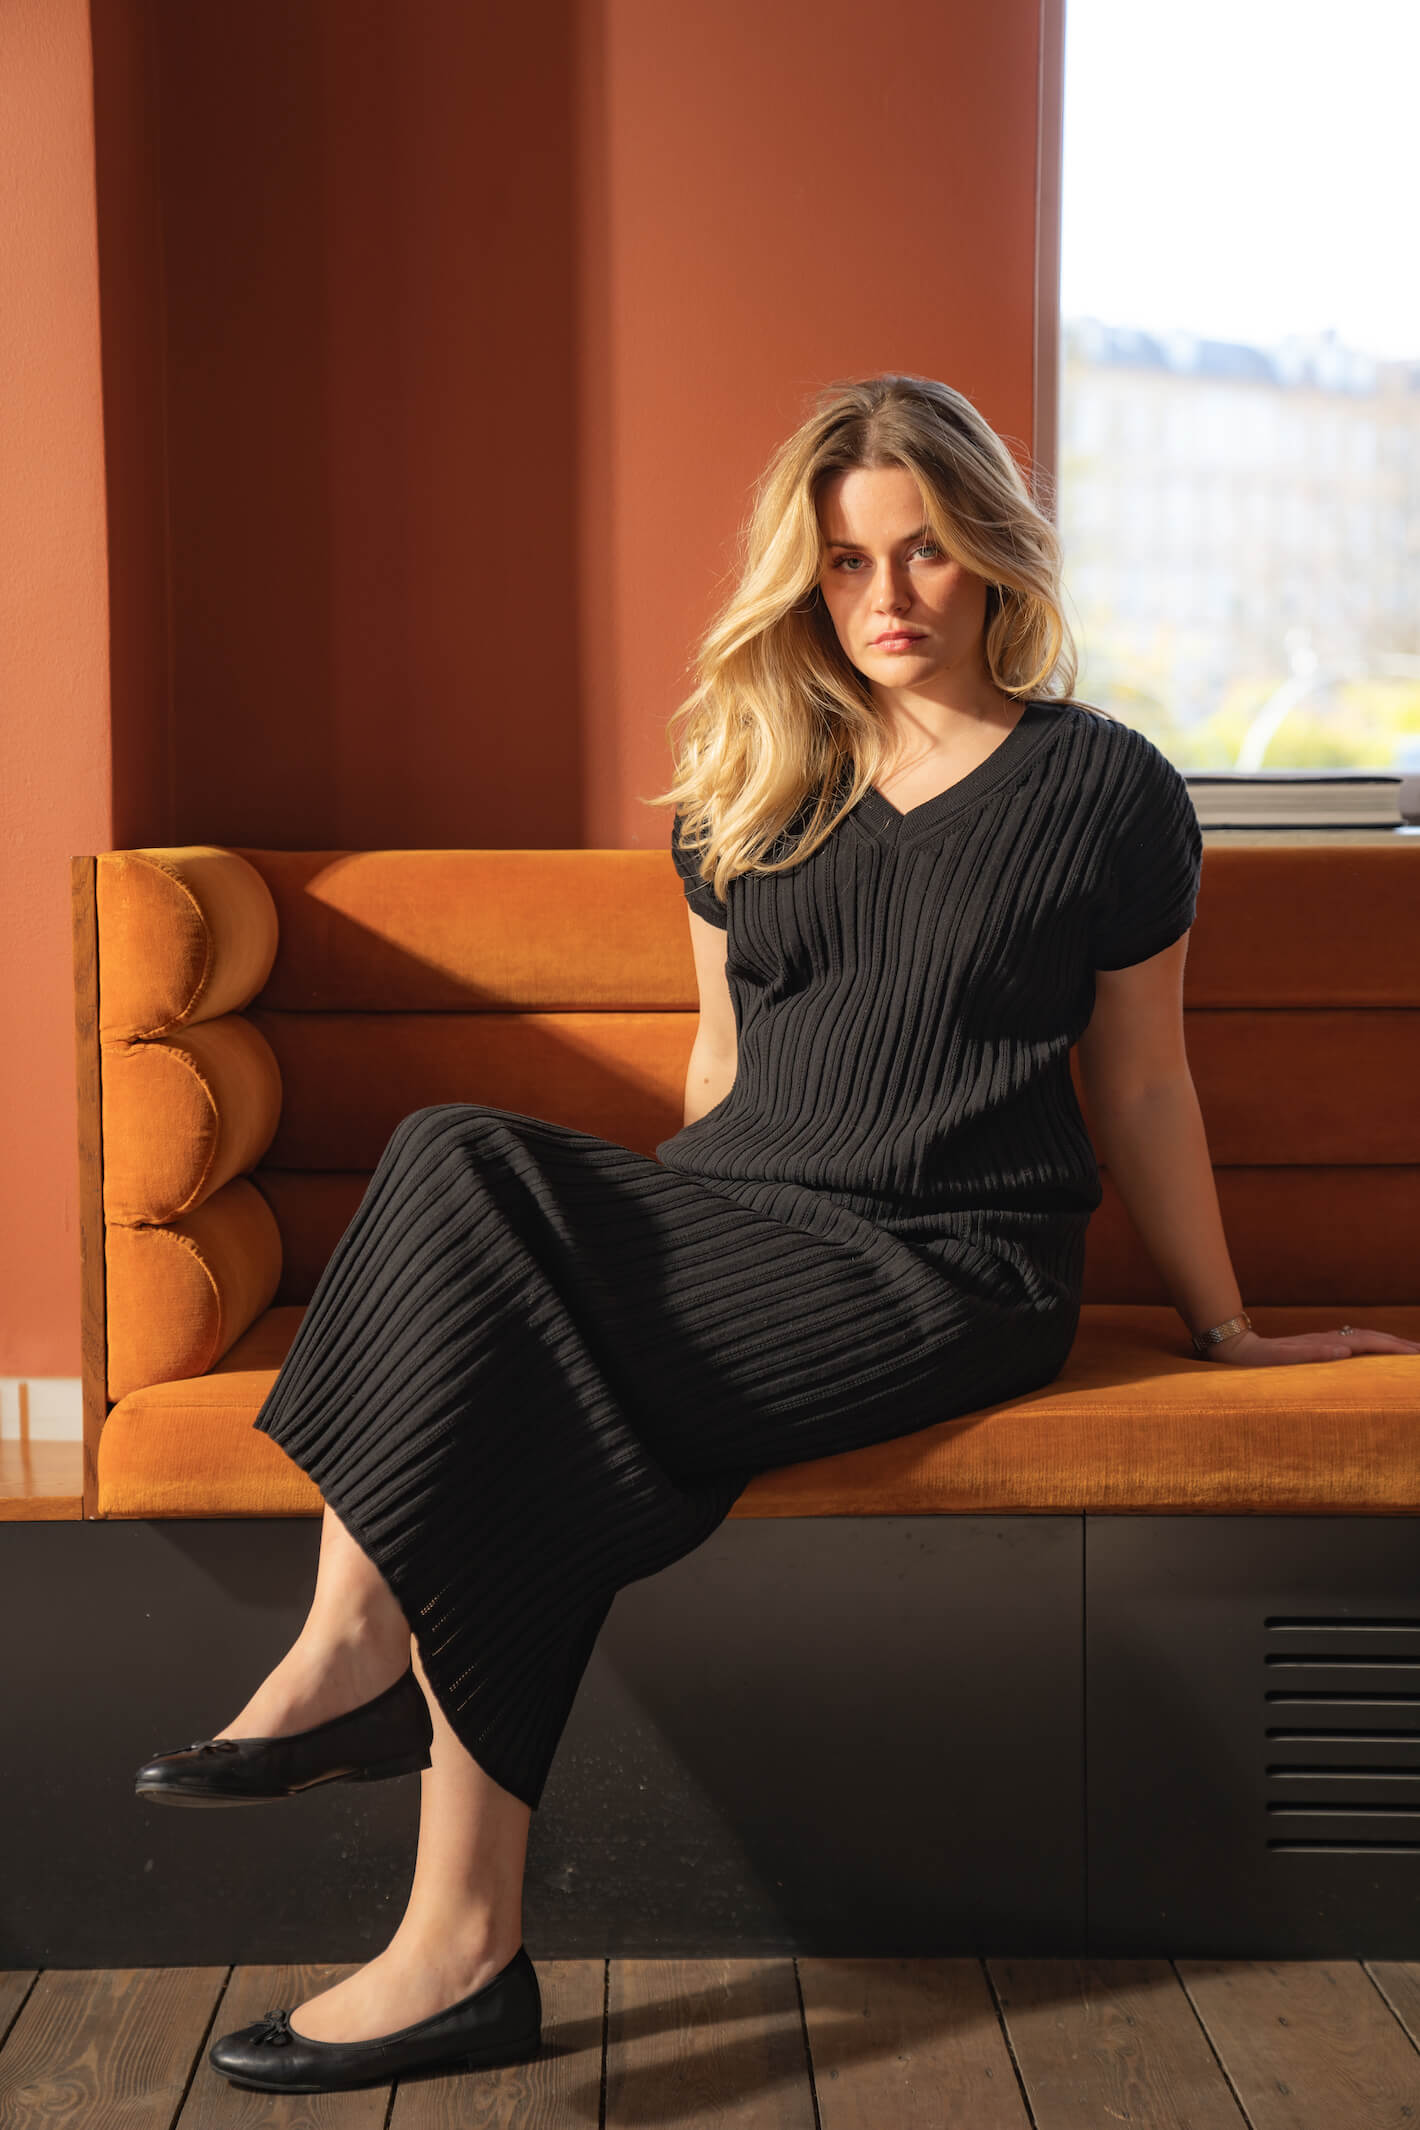 Woman sitting on an orange couch wearing a black ribbed dress by Cyme Copenhagen. She has blonde hair and black ballet flats, with an orange and sunlit background. The scene highlights the elegance and comfort of the Cyme Copenhagen spring/summer 2024 collection.